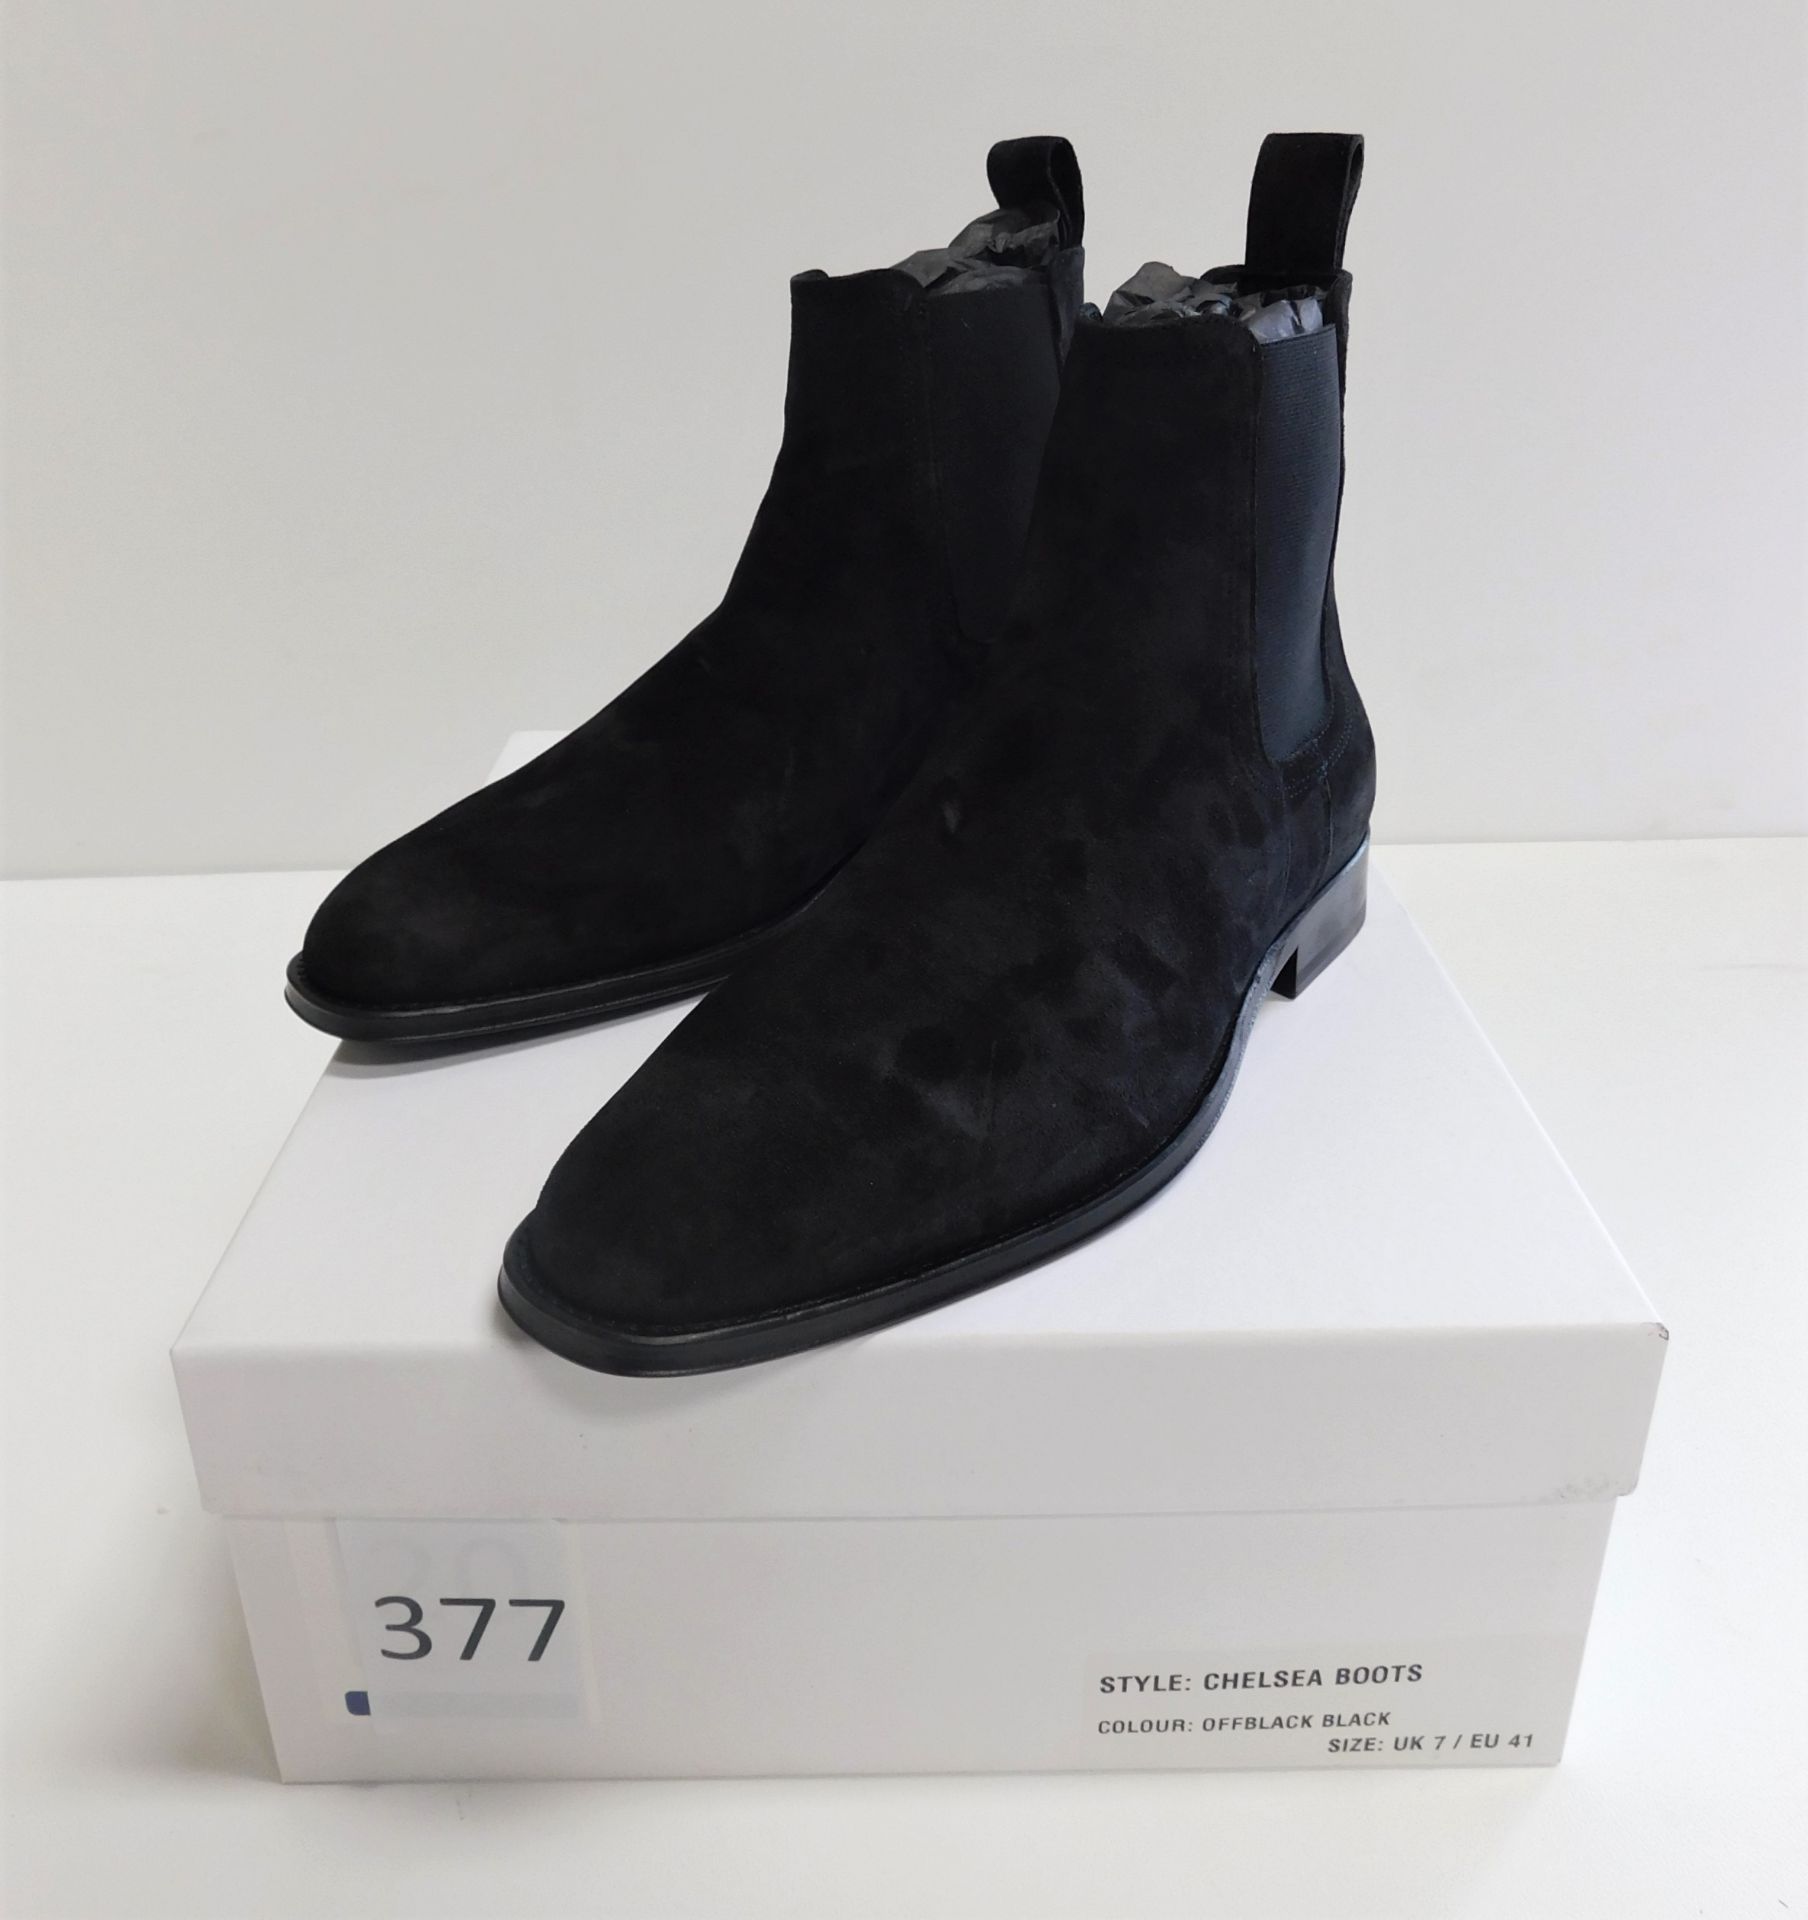 Pair of Ardent “Offblack Black” Chelsea Boots, Size 7 (Located: Brentwood. Please Refer to General